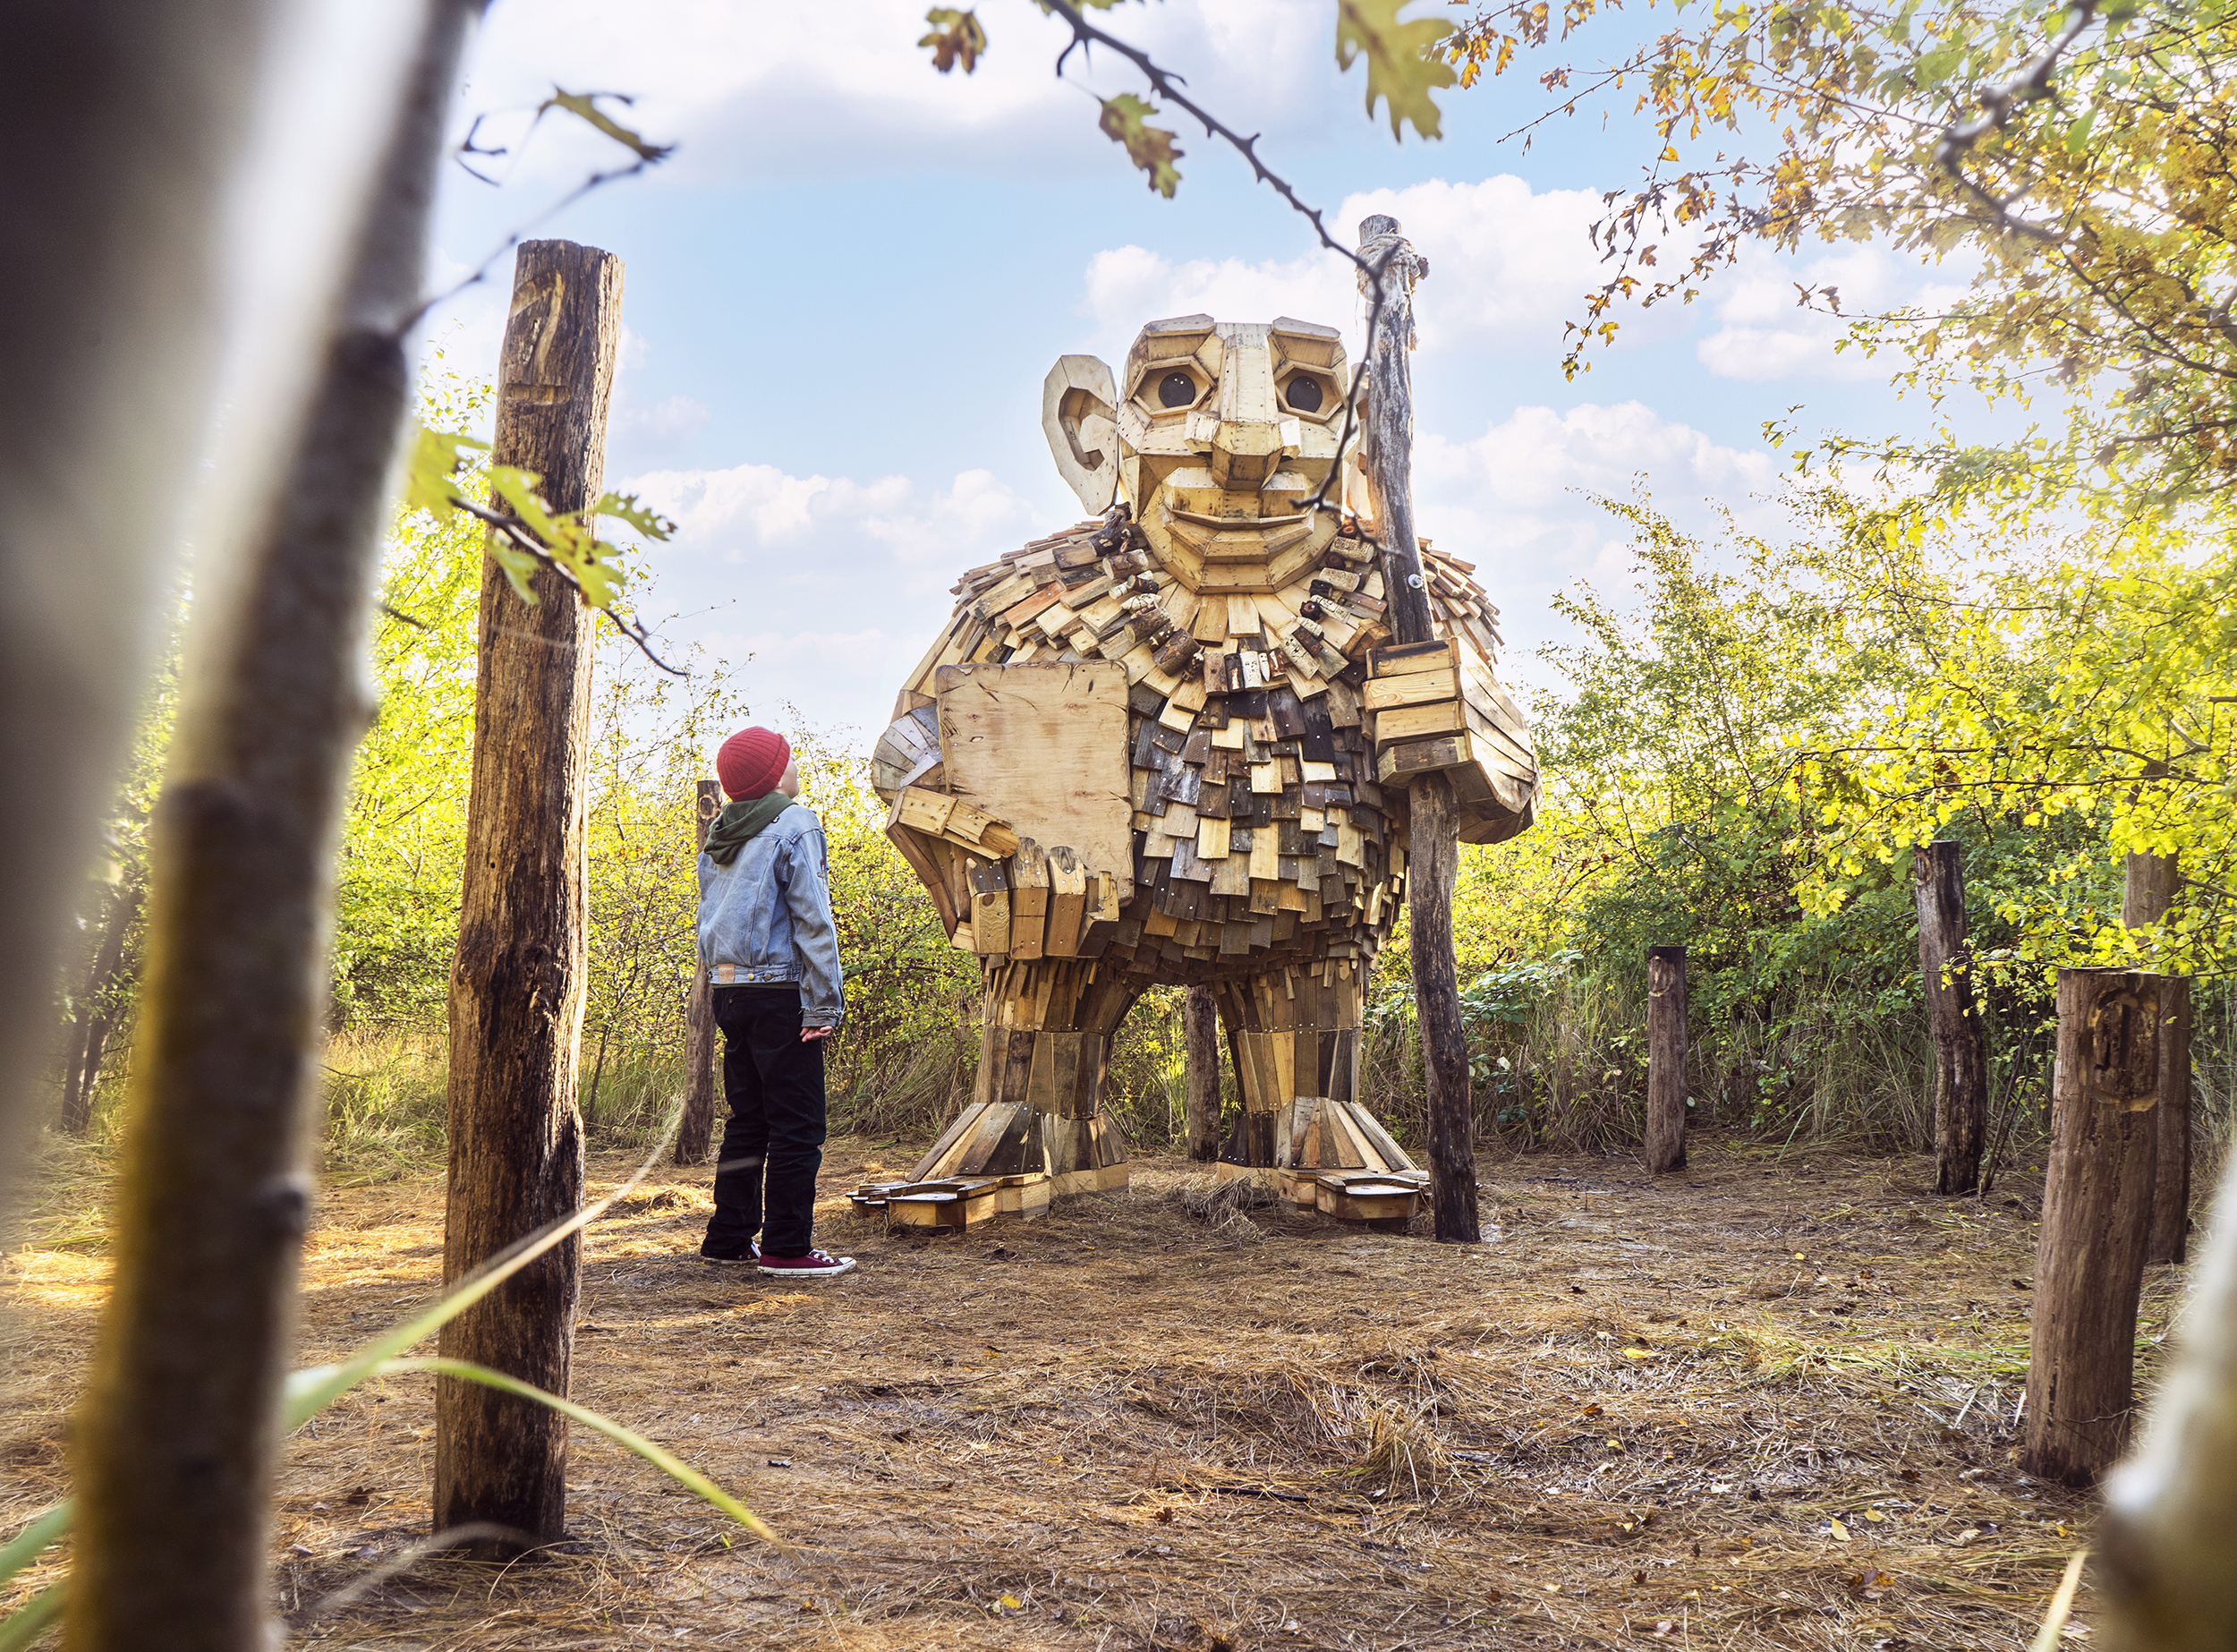 A child looks at a giant wooden troll statue